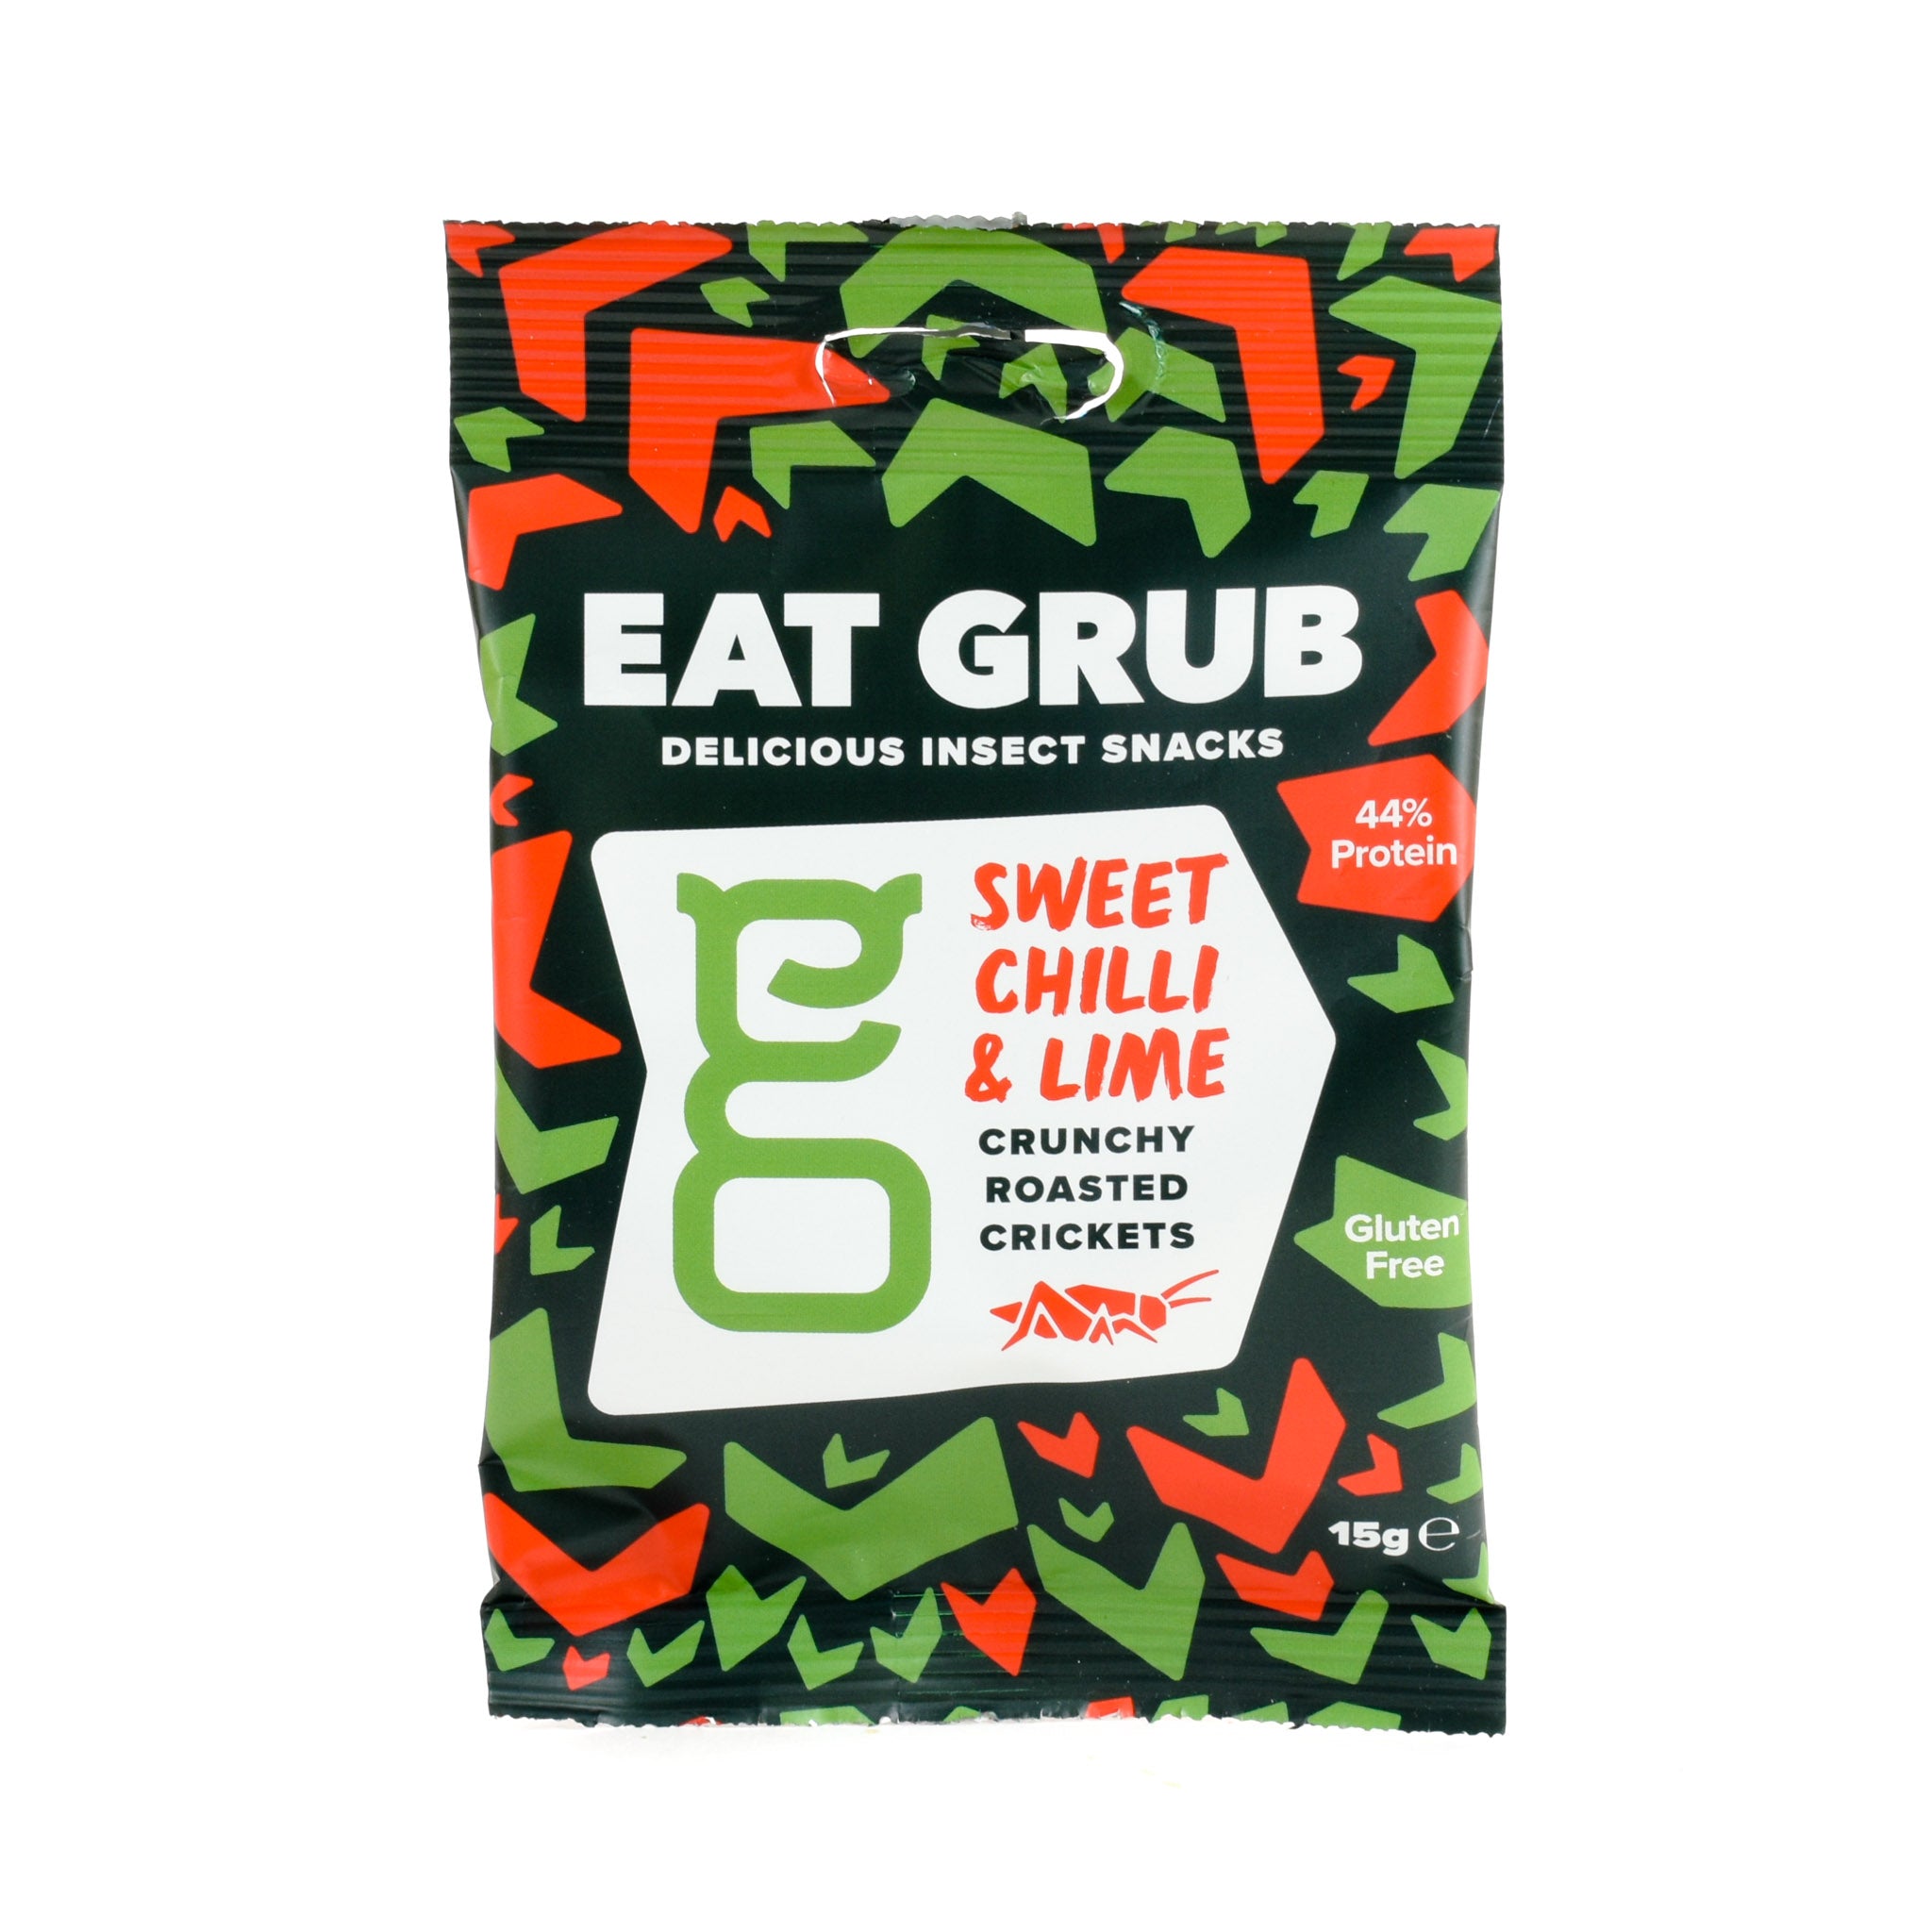 Sweet Chilli & Lime Crunchy Roasted Crickets, 15g